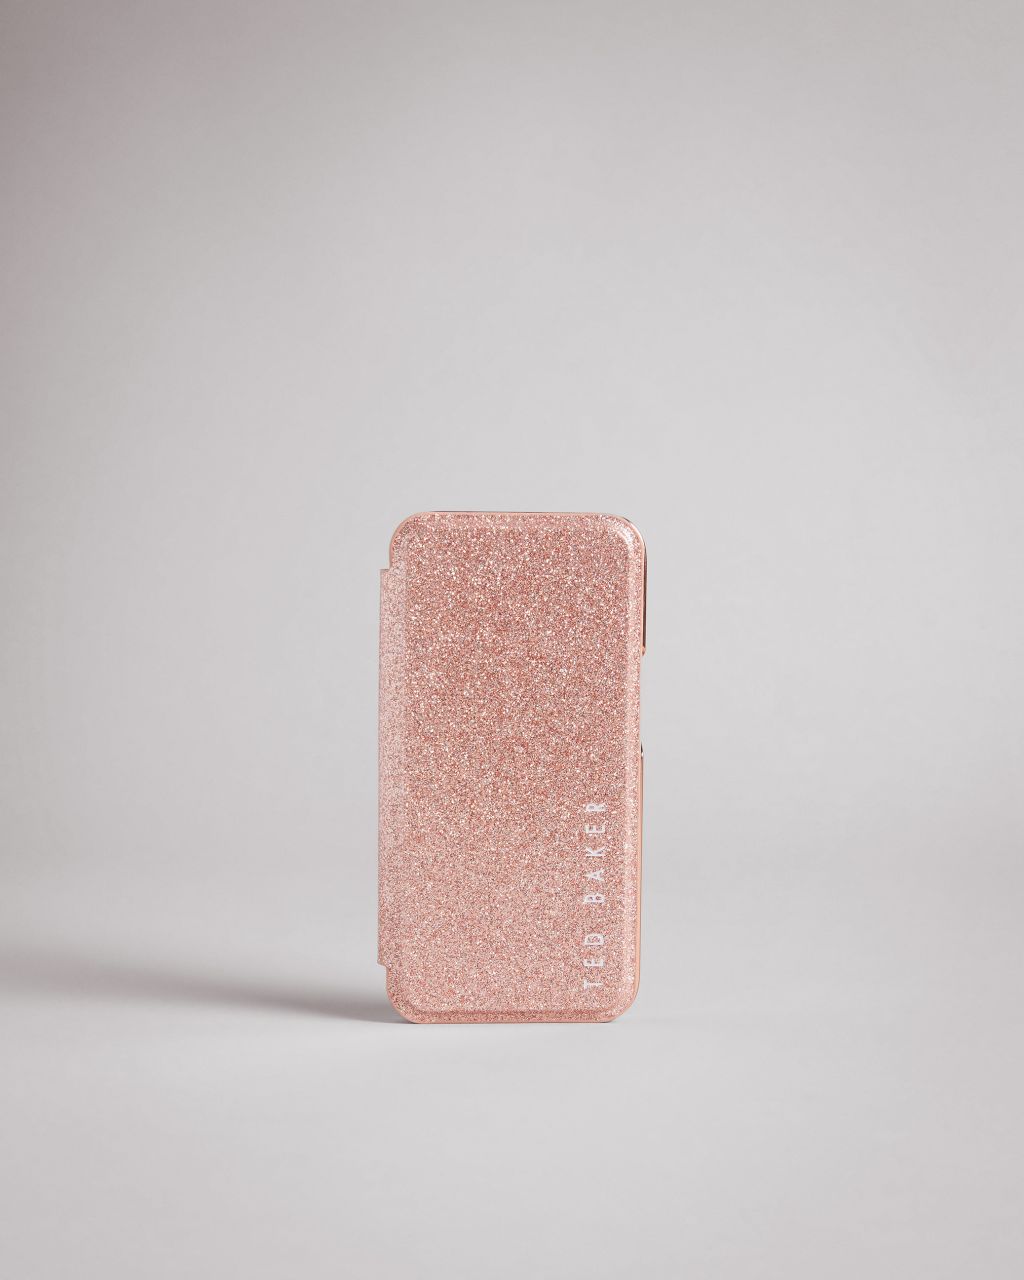 Glitter Iphone 13 Mirror Case in Baby Pink, Gllita product